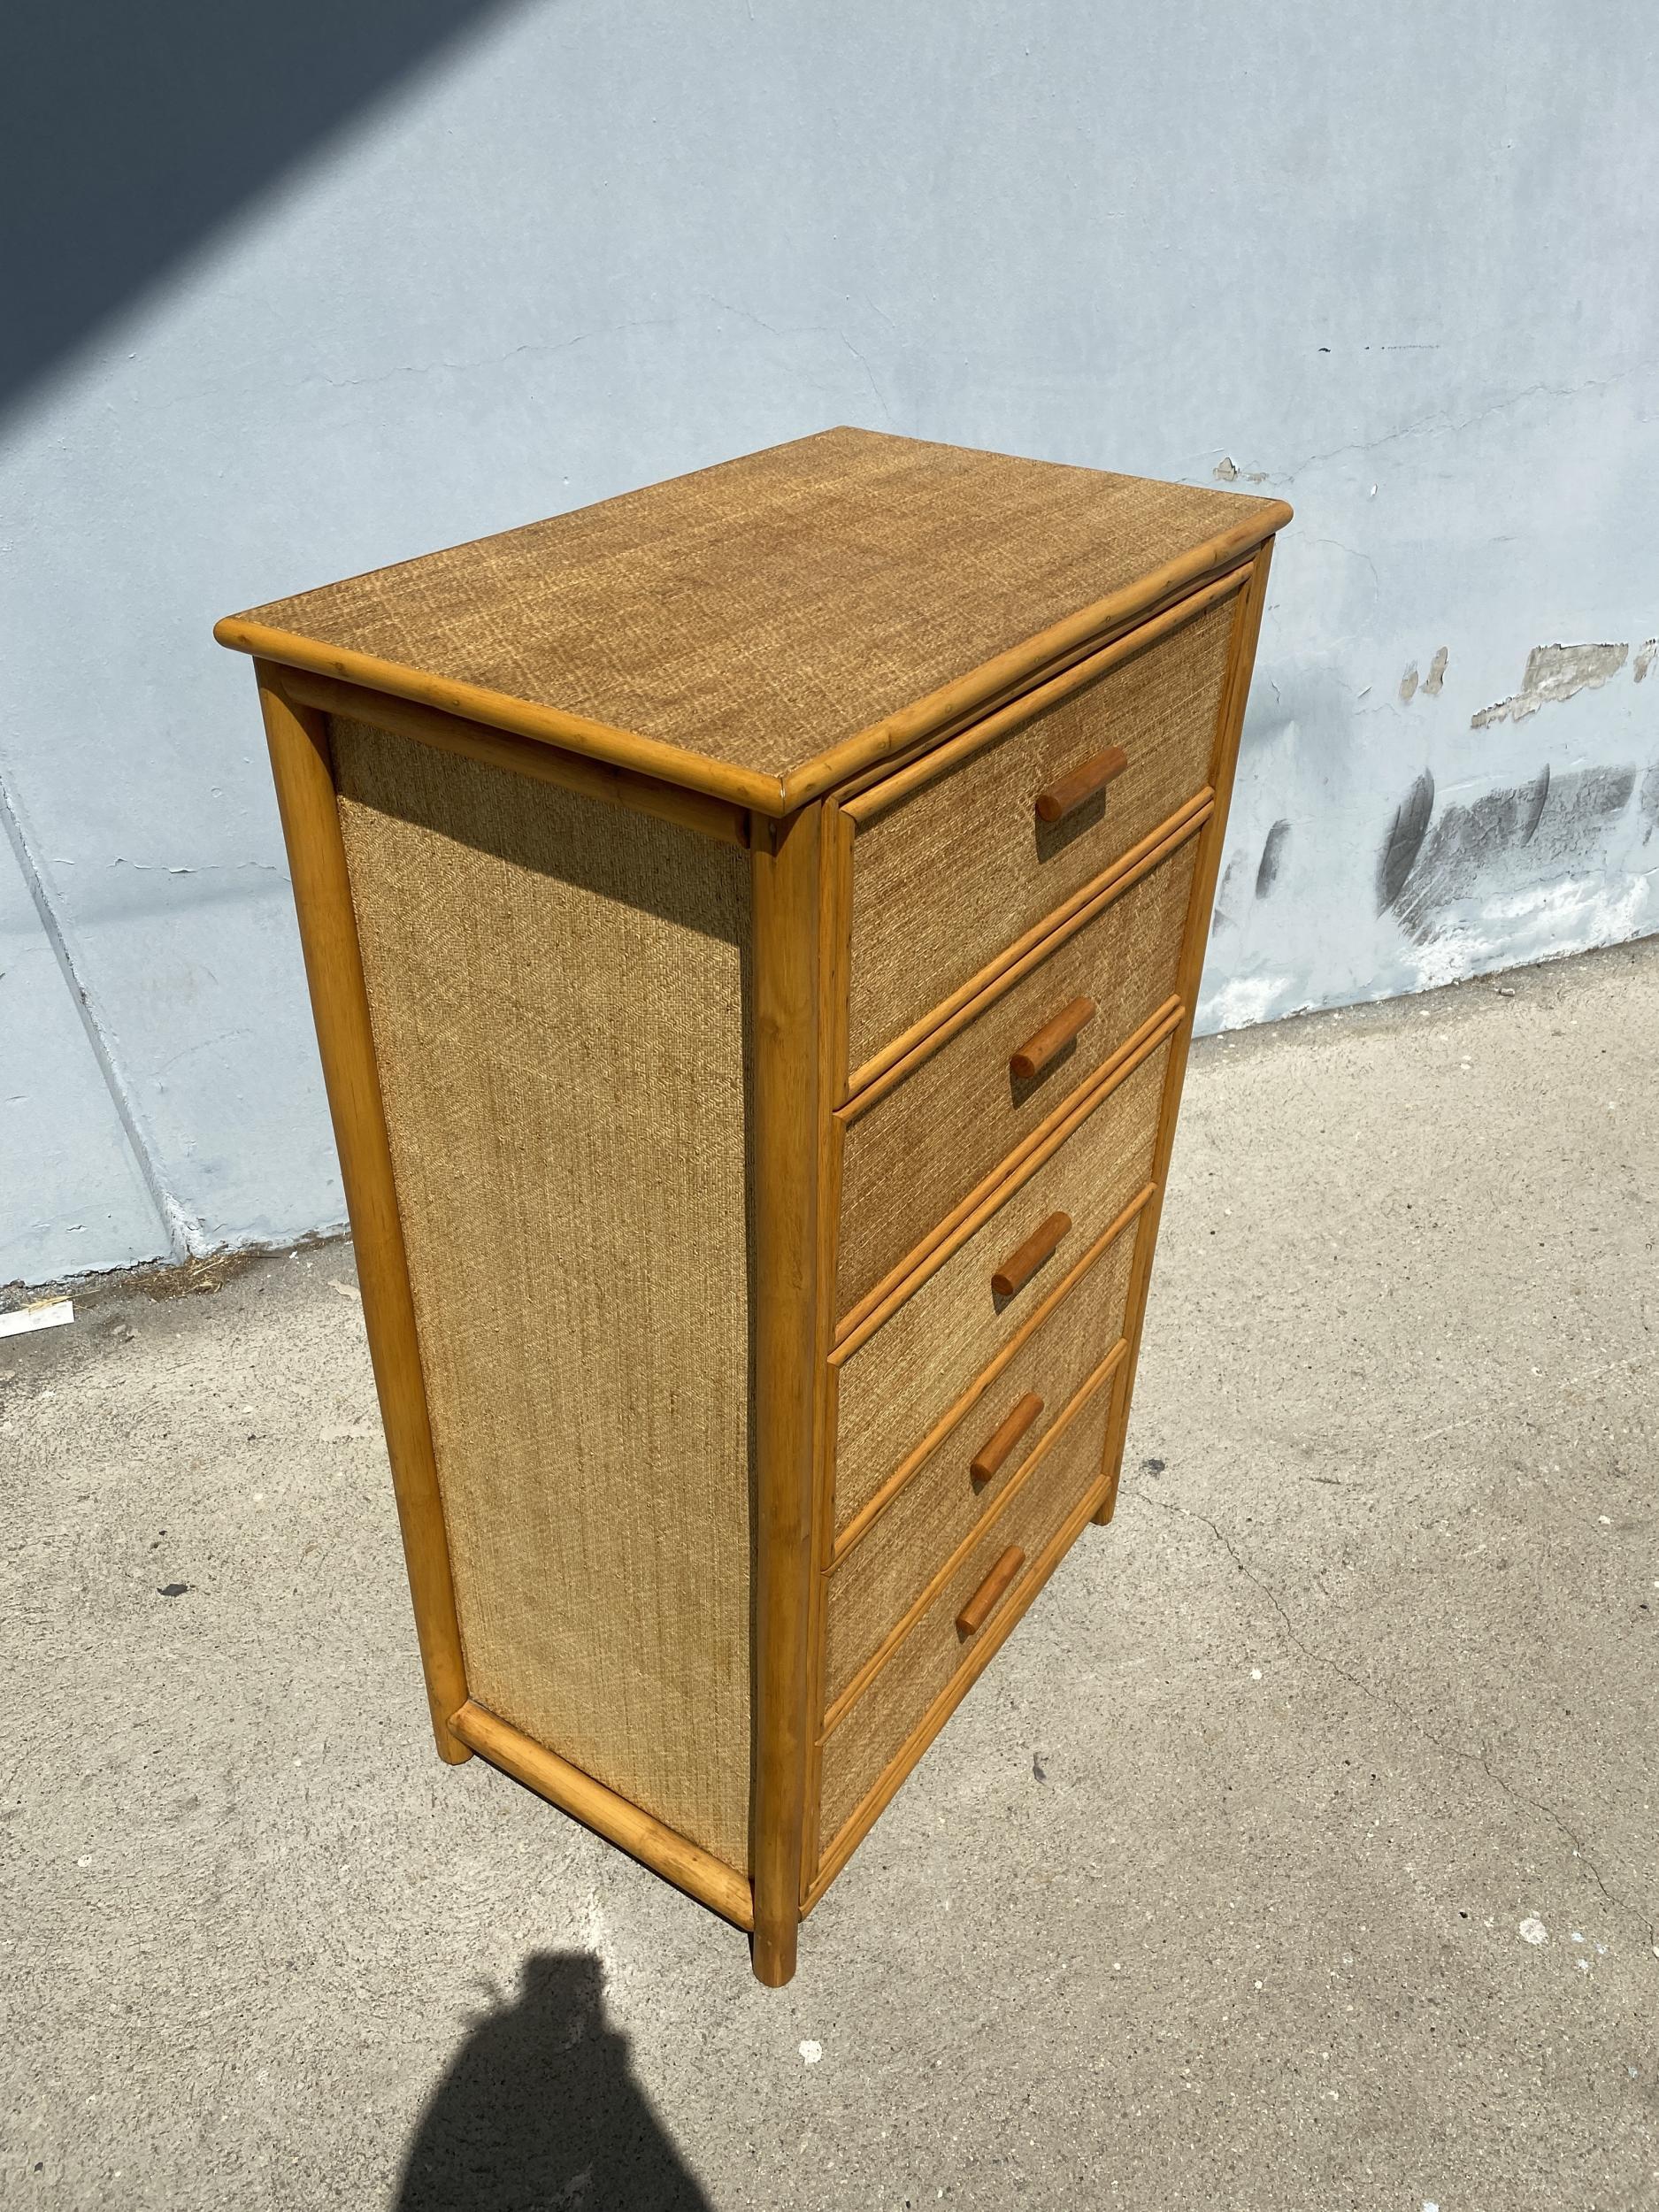 Mid century highboy boy chest of drawers with handwoven rice mat coverings, five large center drawers and rattan border.

Restored to new for you.

All rattan, bamboo and wicker furniture has been painstakingly refurbished to the highest